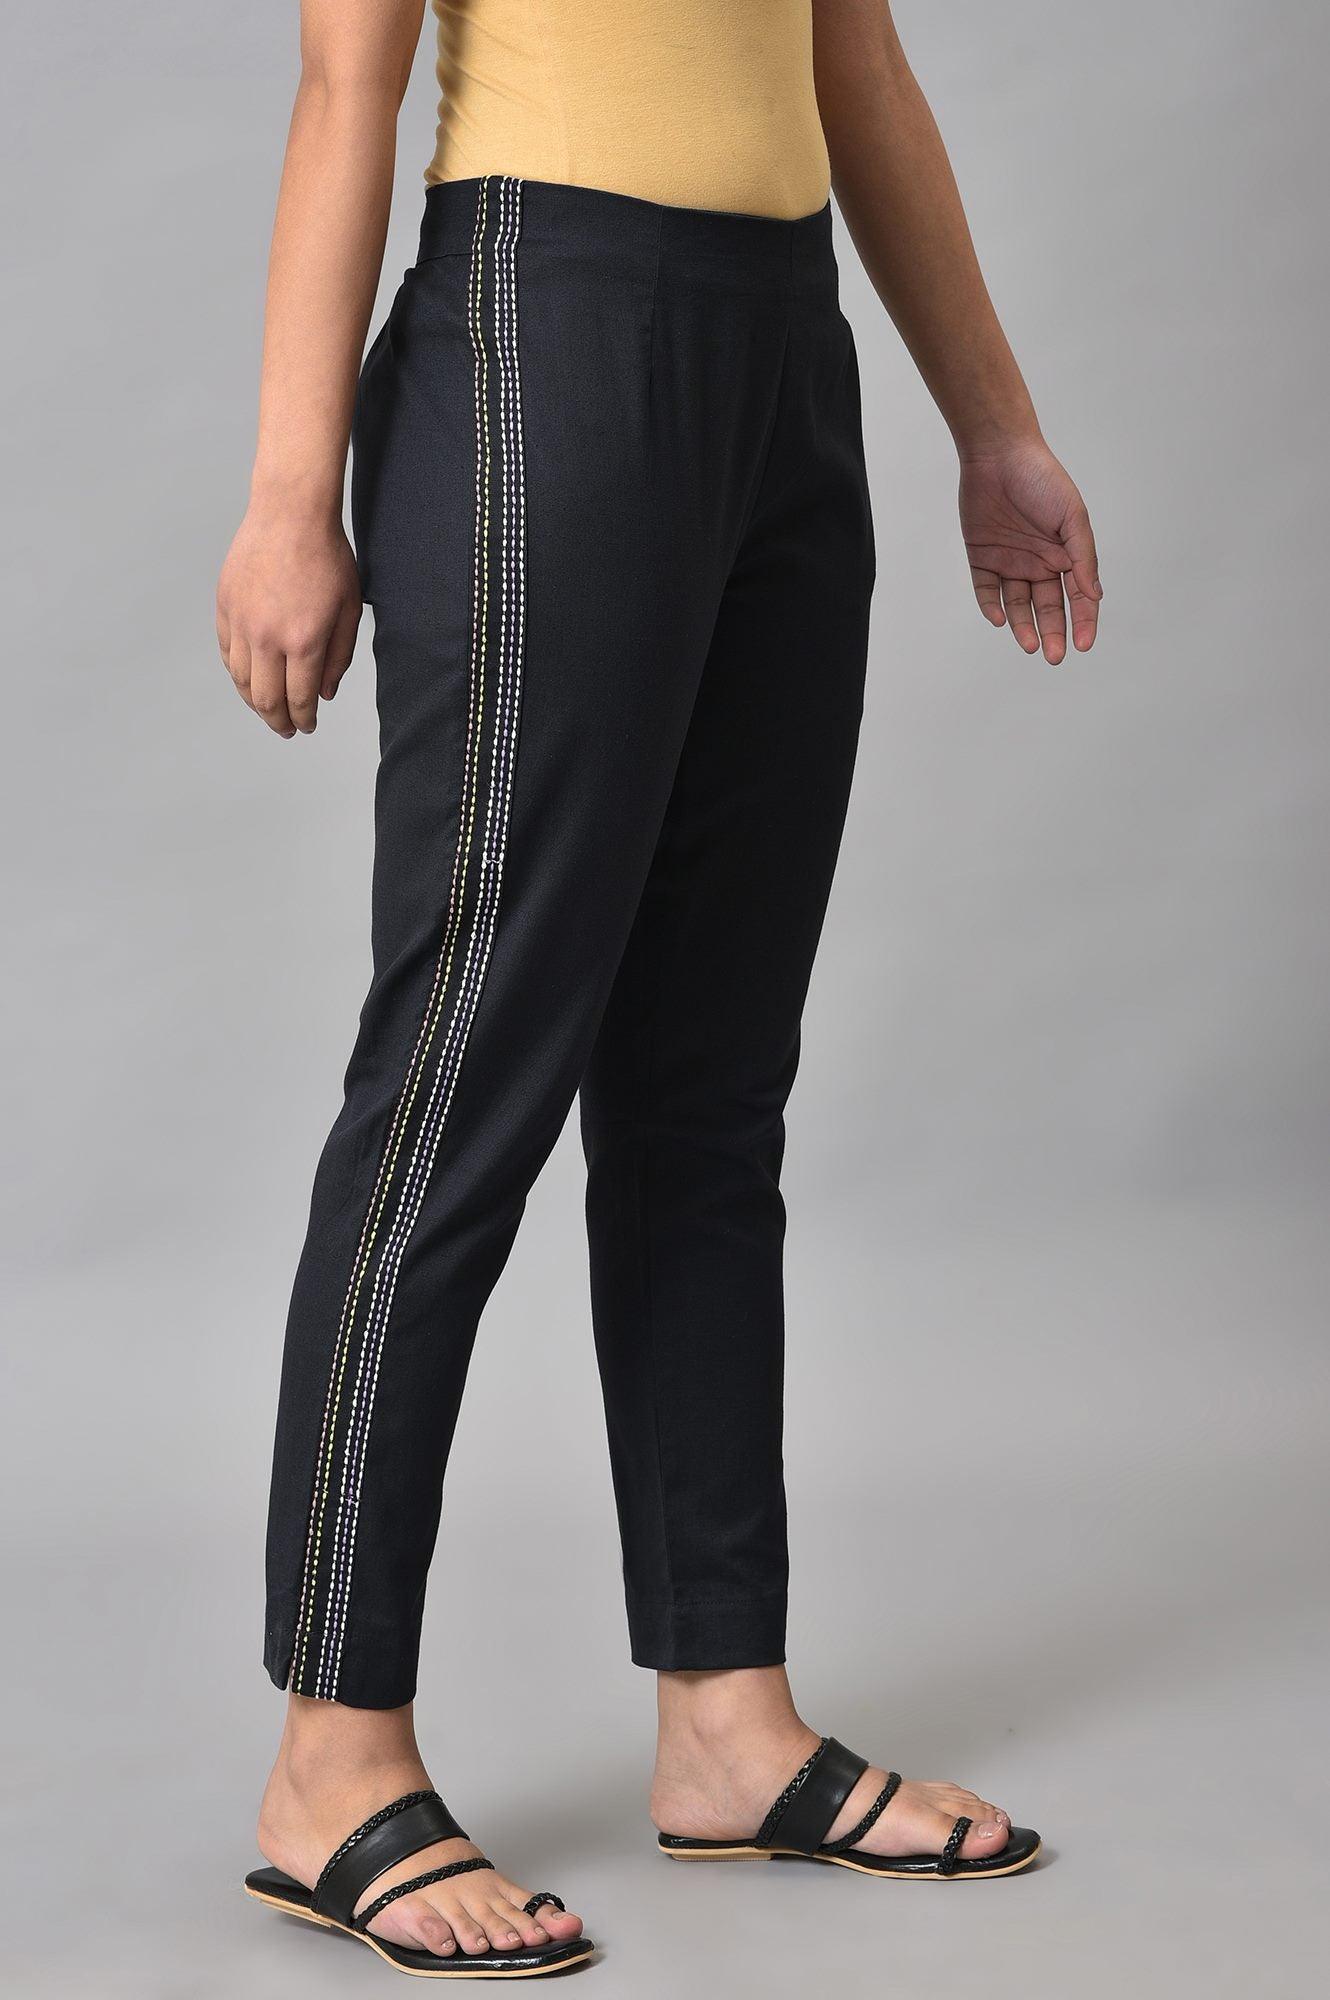 Plus Size Black Parallel Pants With Side Embroidery - wforwoman